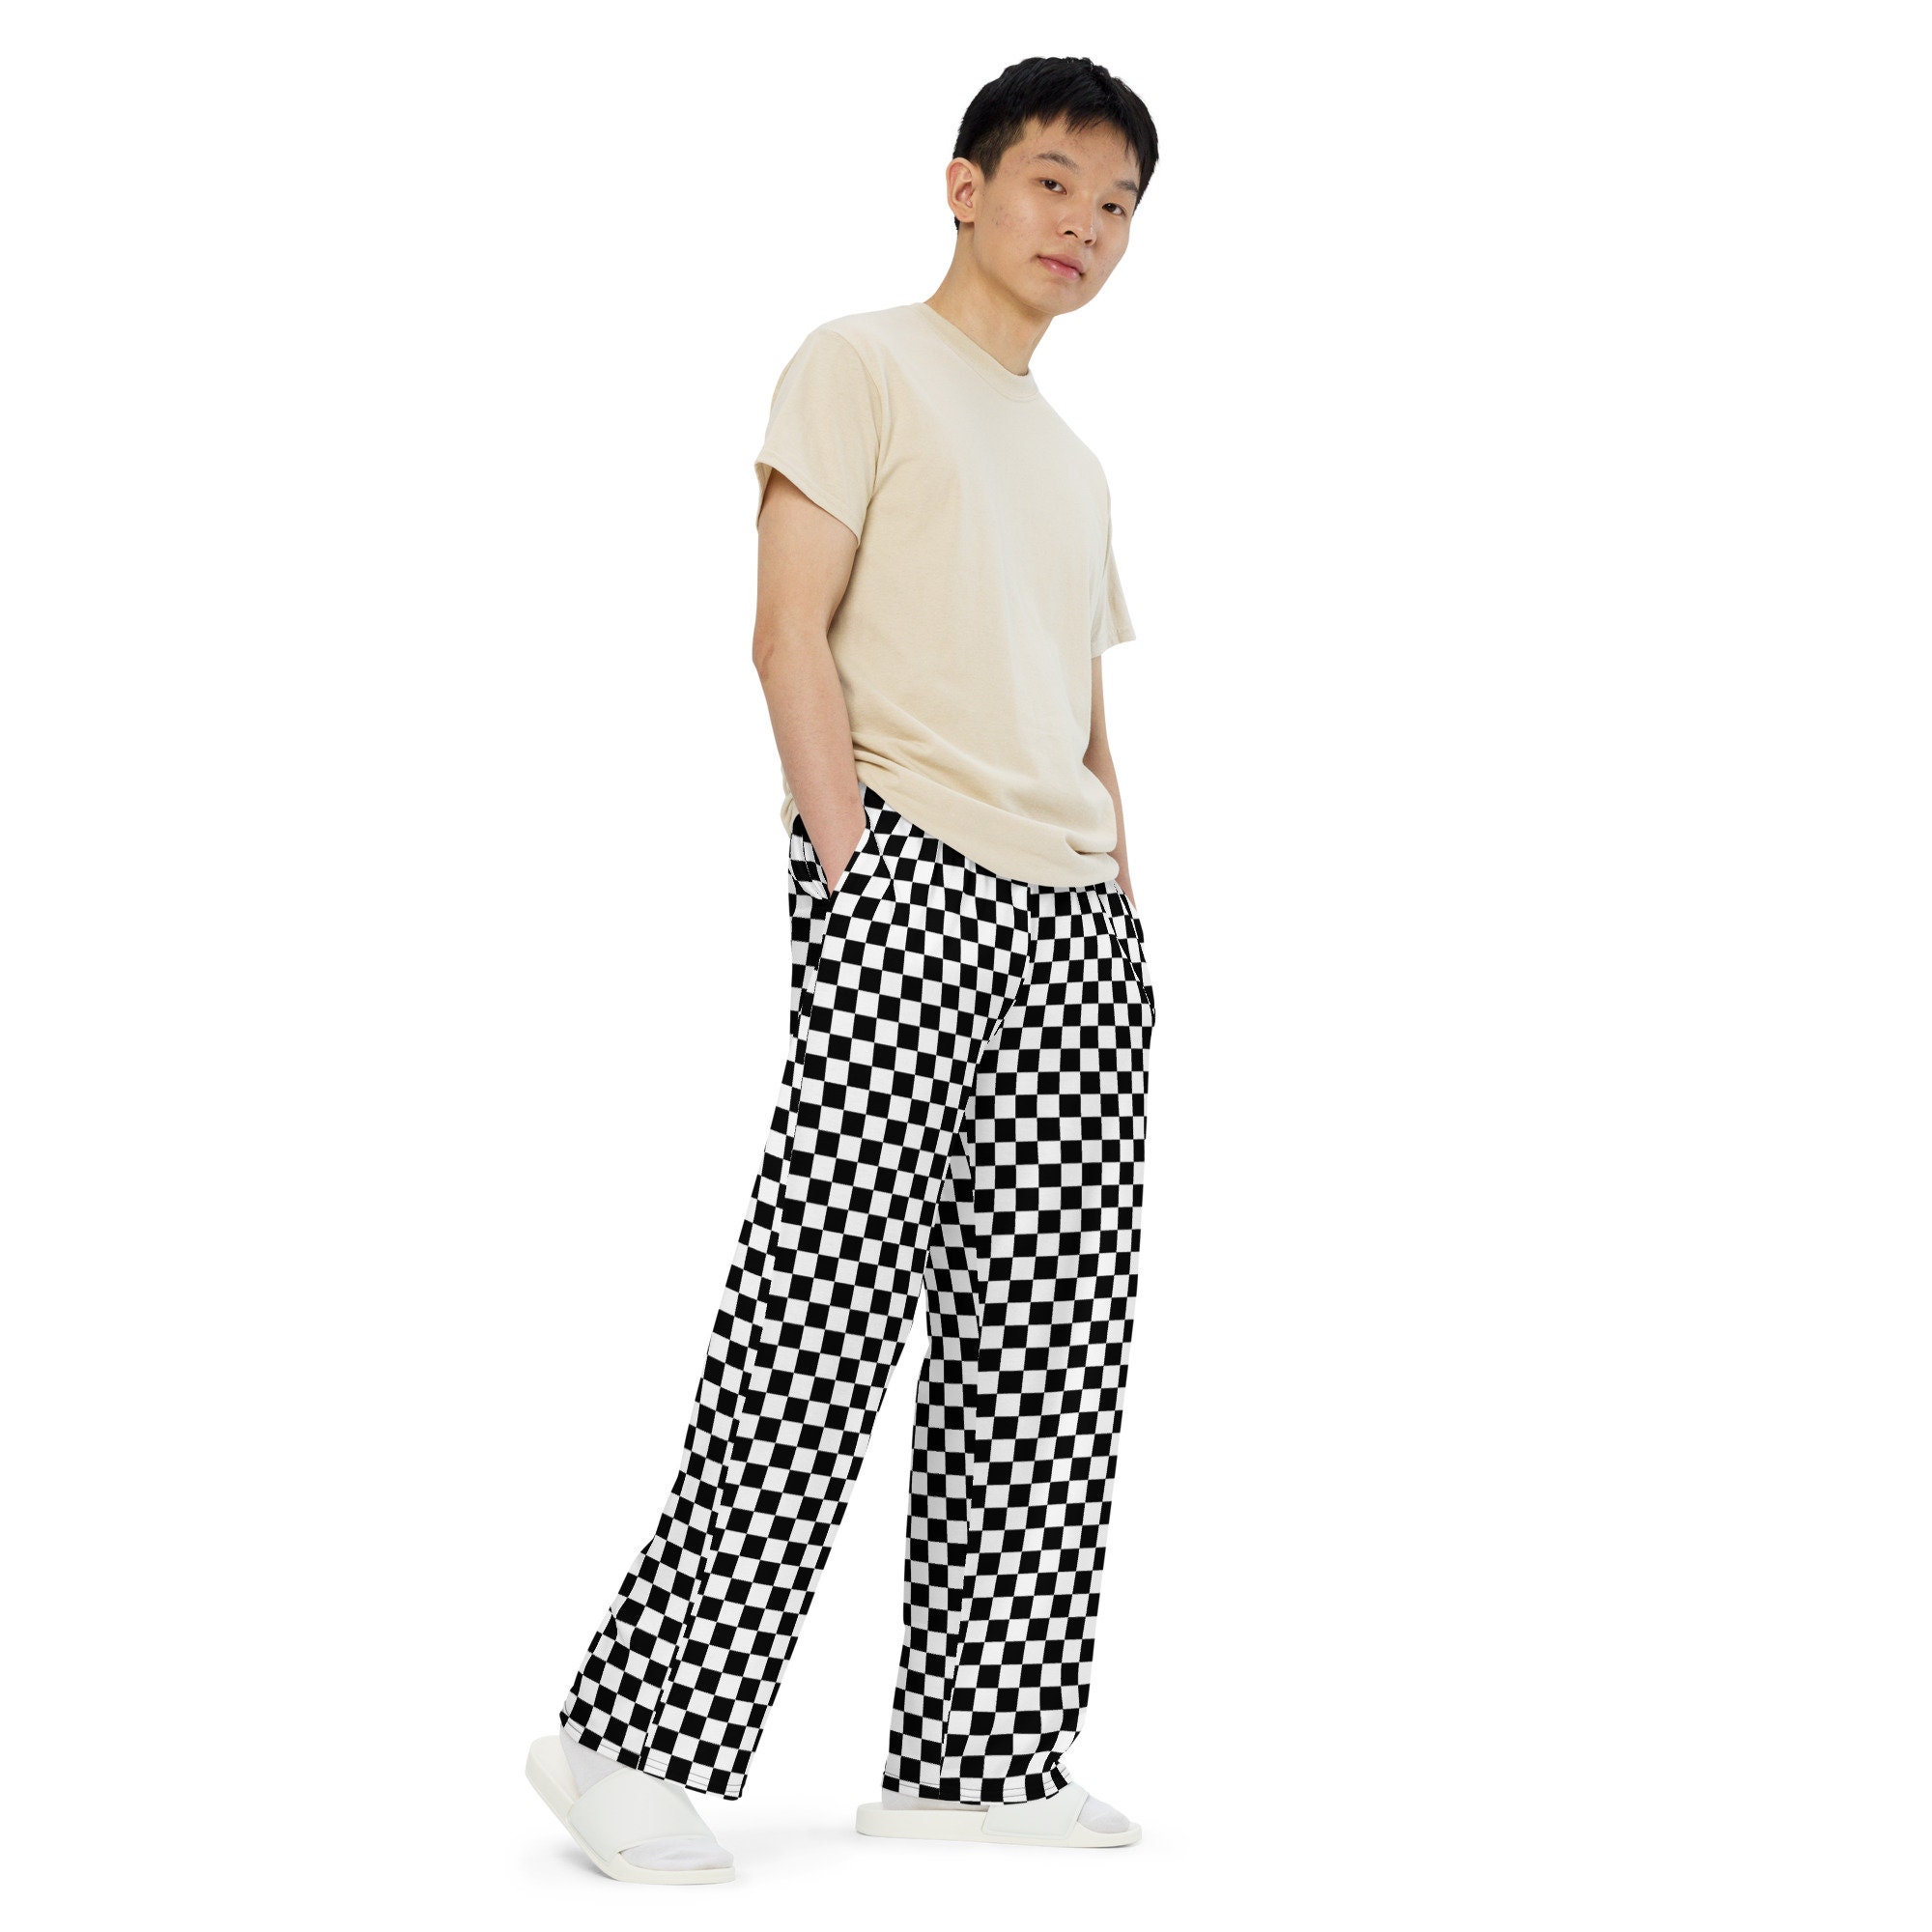 Checkered Pattern Pants, Black and White Checkered Joggers With